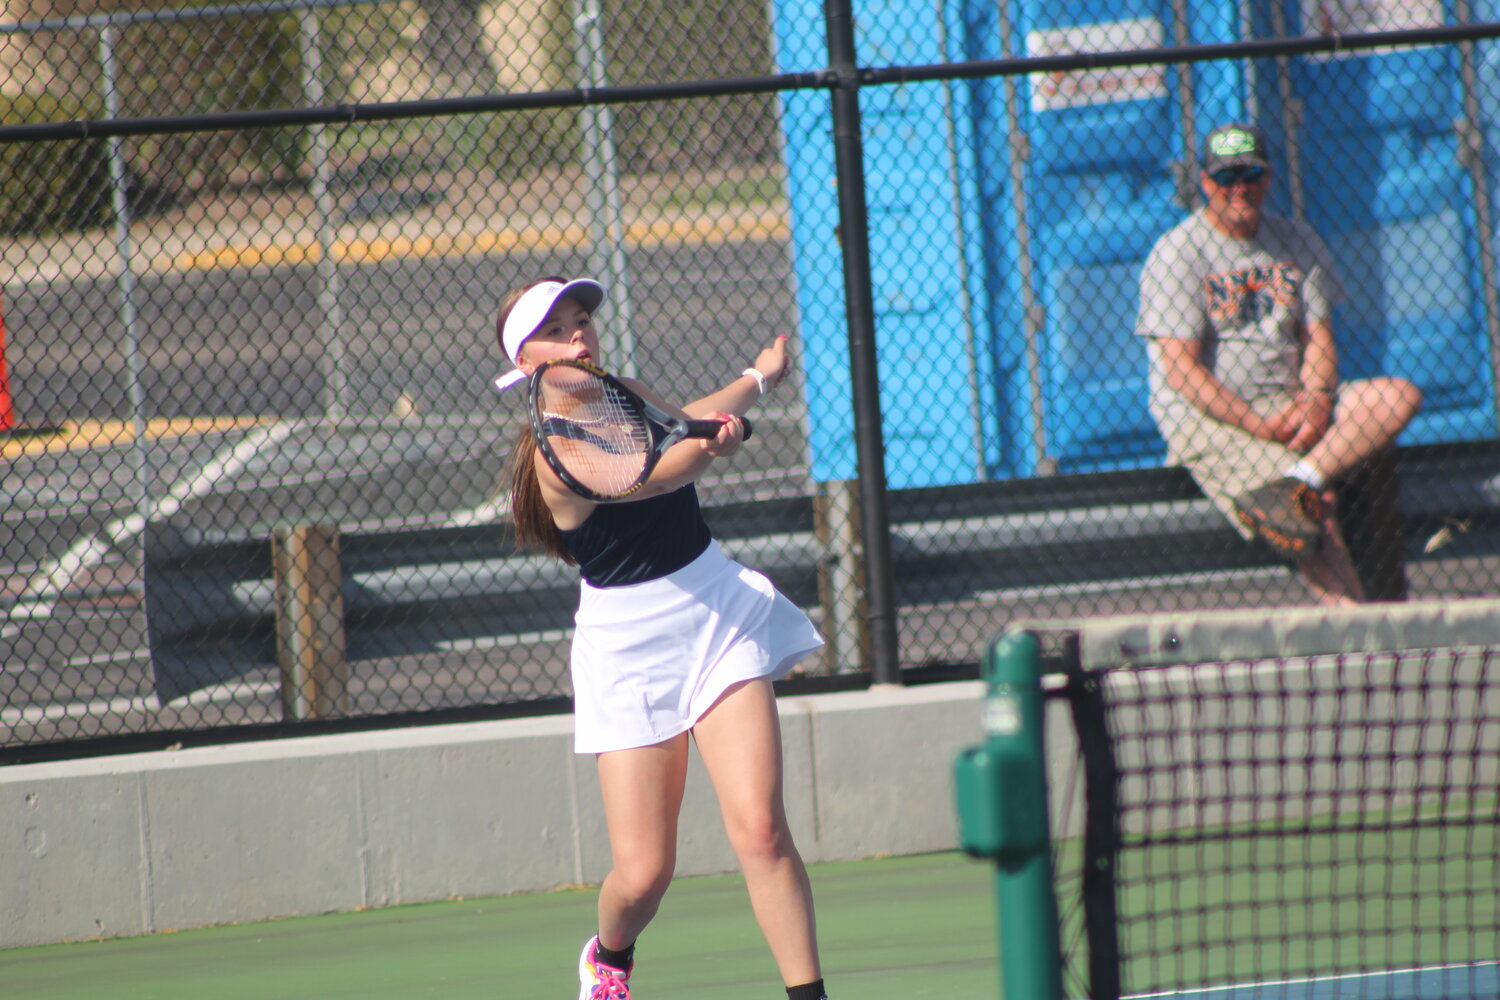 Abigail Allen has competed well for the Chargers this season as the No. 3 singles spot.